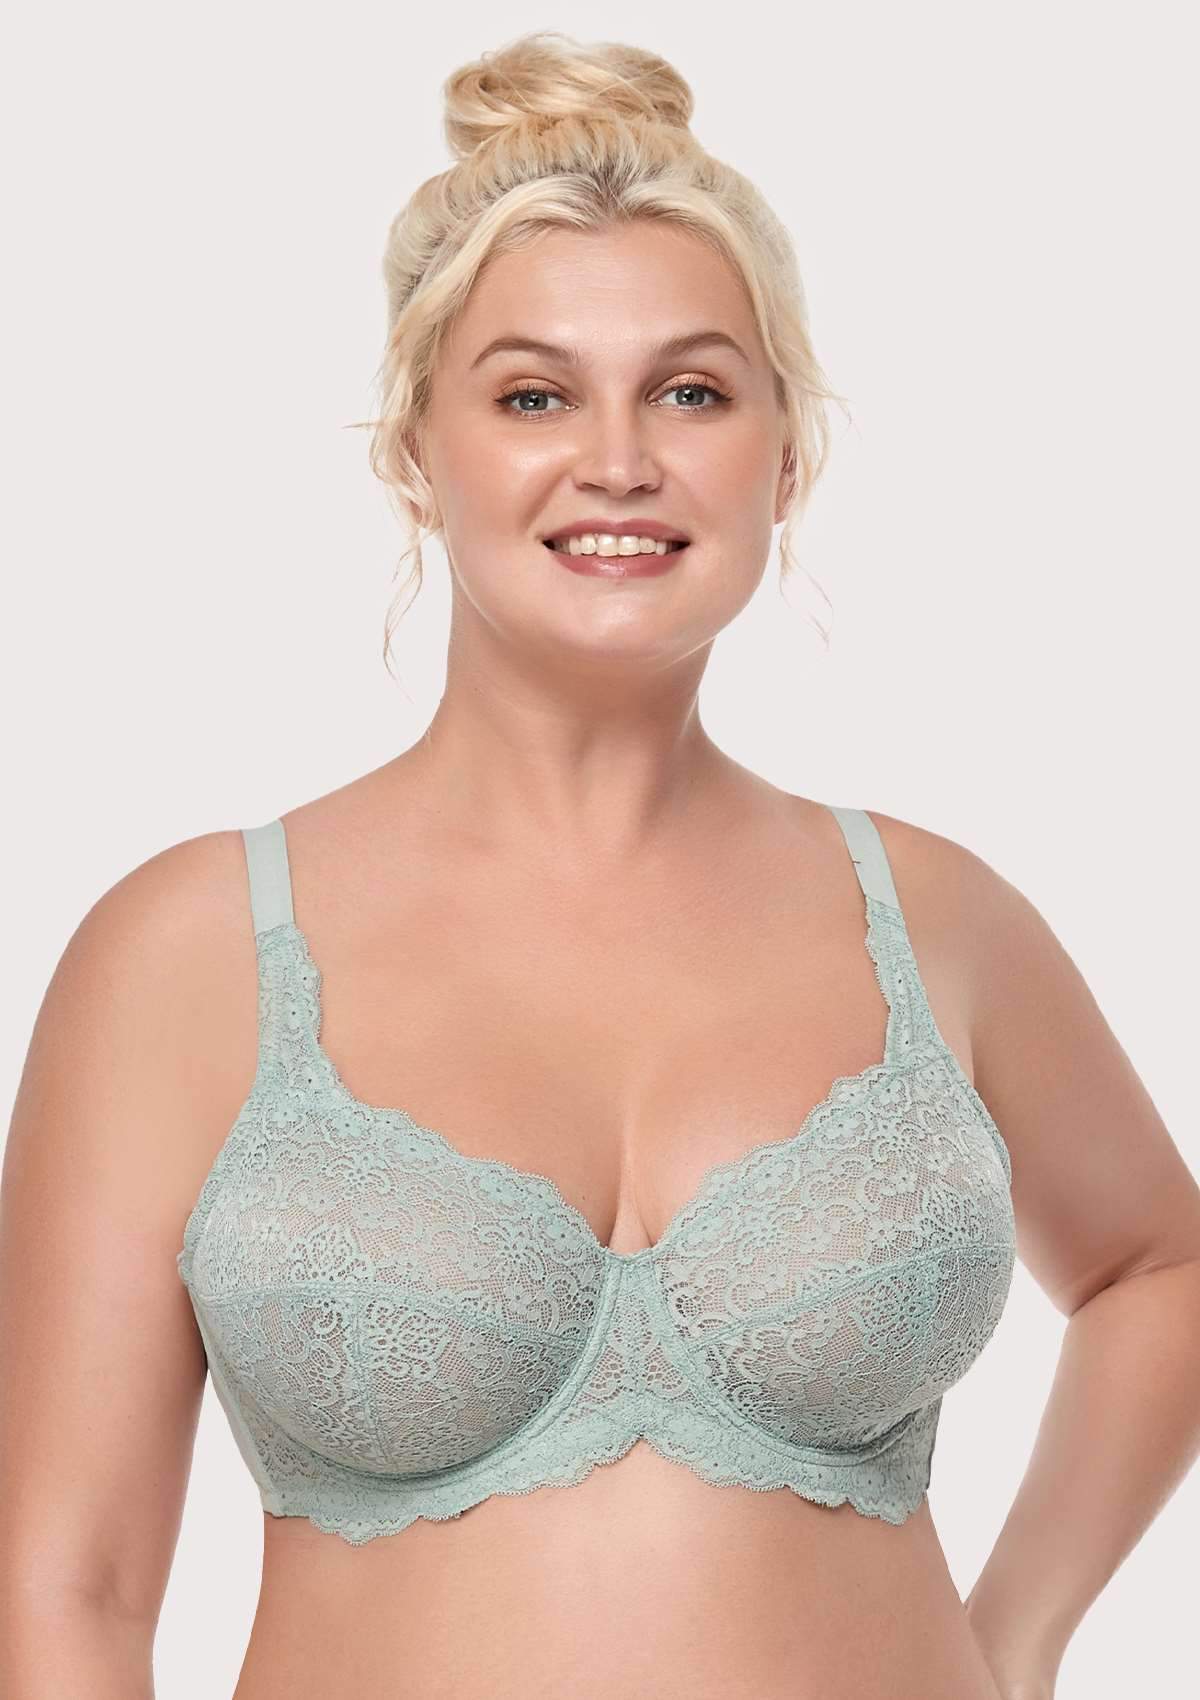 HSIA All-Over Floral Lace: Best Bra For Elderly With Sagging Breasts - Crystal Blue / 44 / DDD/F